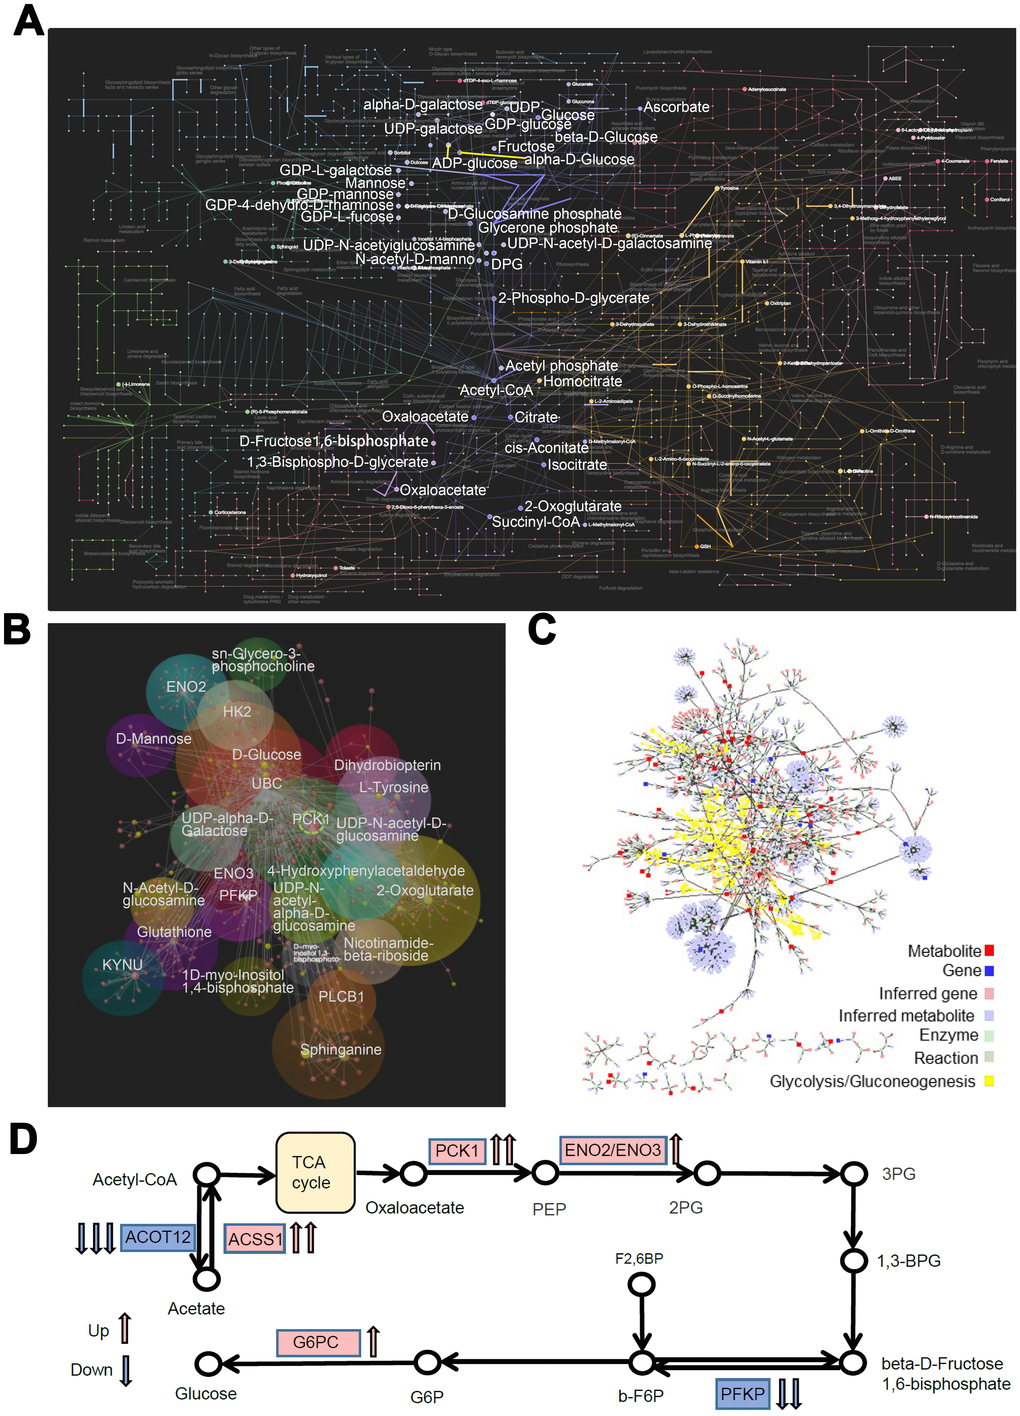 Network and pathway analyses of transcriptome and metabolome changes in pathways related to glucose metabolism in PLC-PRF-5 cells with the rs290487 C/C genotype. (A) The network shows interactions between DEGs and metabolites in the metabolic pathways visualized using OmicsNet. The bold dots and lines represent metabolites and genes in the glucose metabolic pathway, respectively. (B) The interactome network between transcripts and metabolites visualized using MetScape 3. The transcripts and metabolites highlighted in yellow represent those involved in the glycolysis and gluconeogenesis pathway. (C) The subgroup analysis of the network shows the interactions between DEGs and metabolites in the glucose metabolic pathways as visualized using OmicsNet. Red and yellow dots represent genes and metabolites, respectively. The sizes of the dots are based on their degree values. (D) The probable mechanism of C-allele enhanced gluconeogenesis.